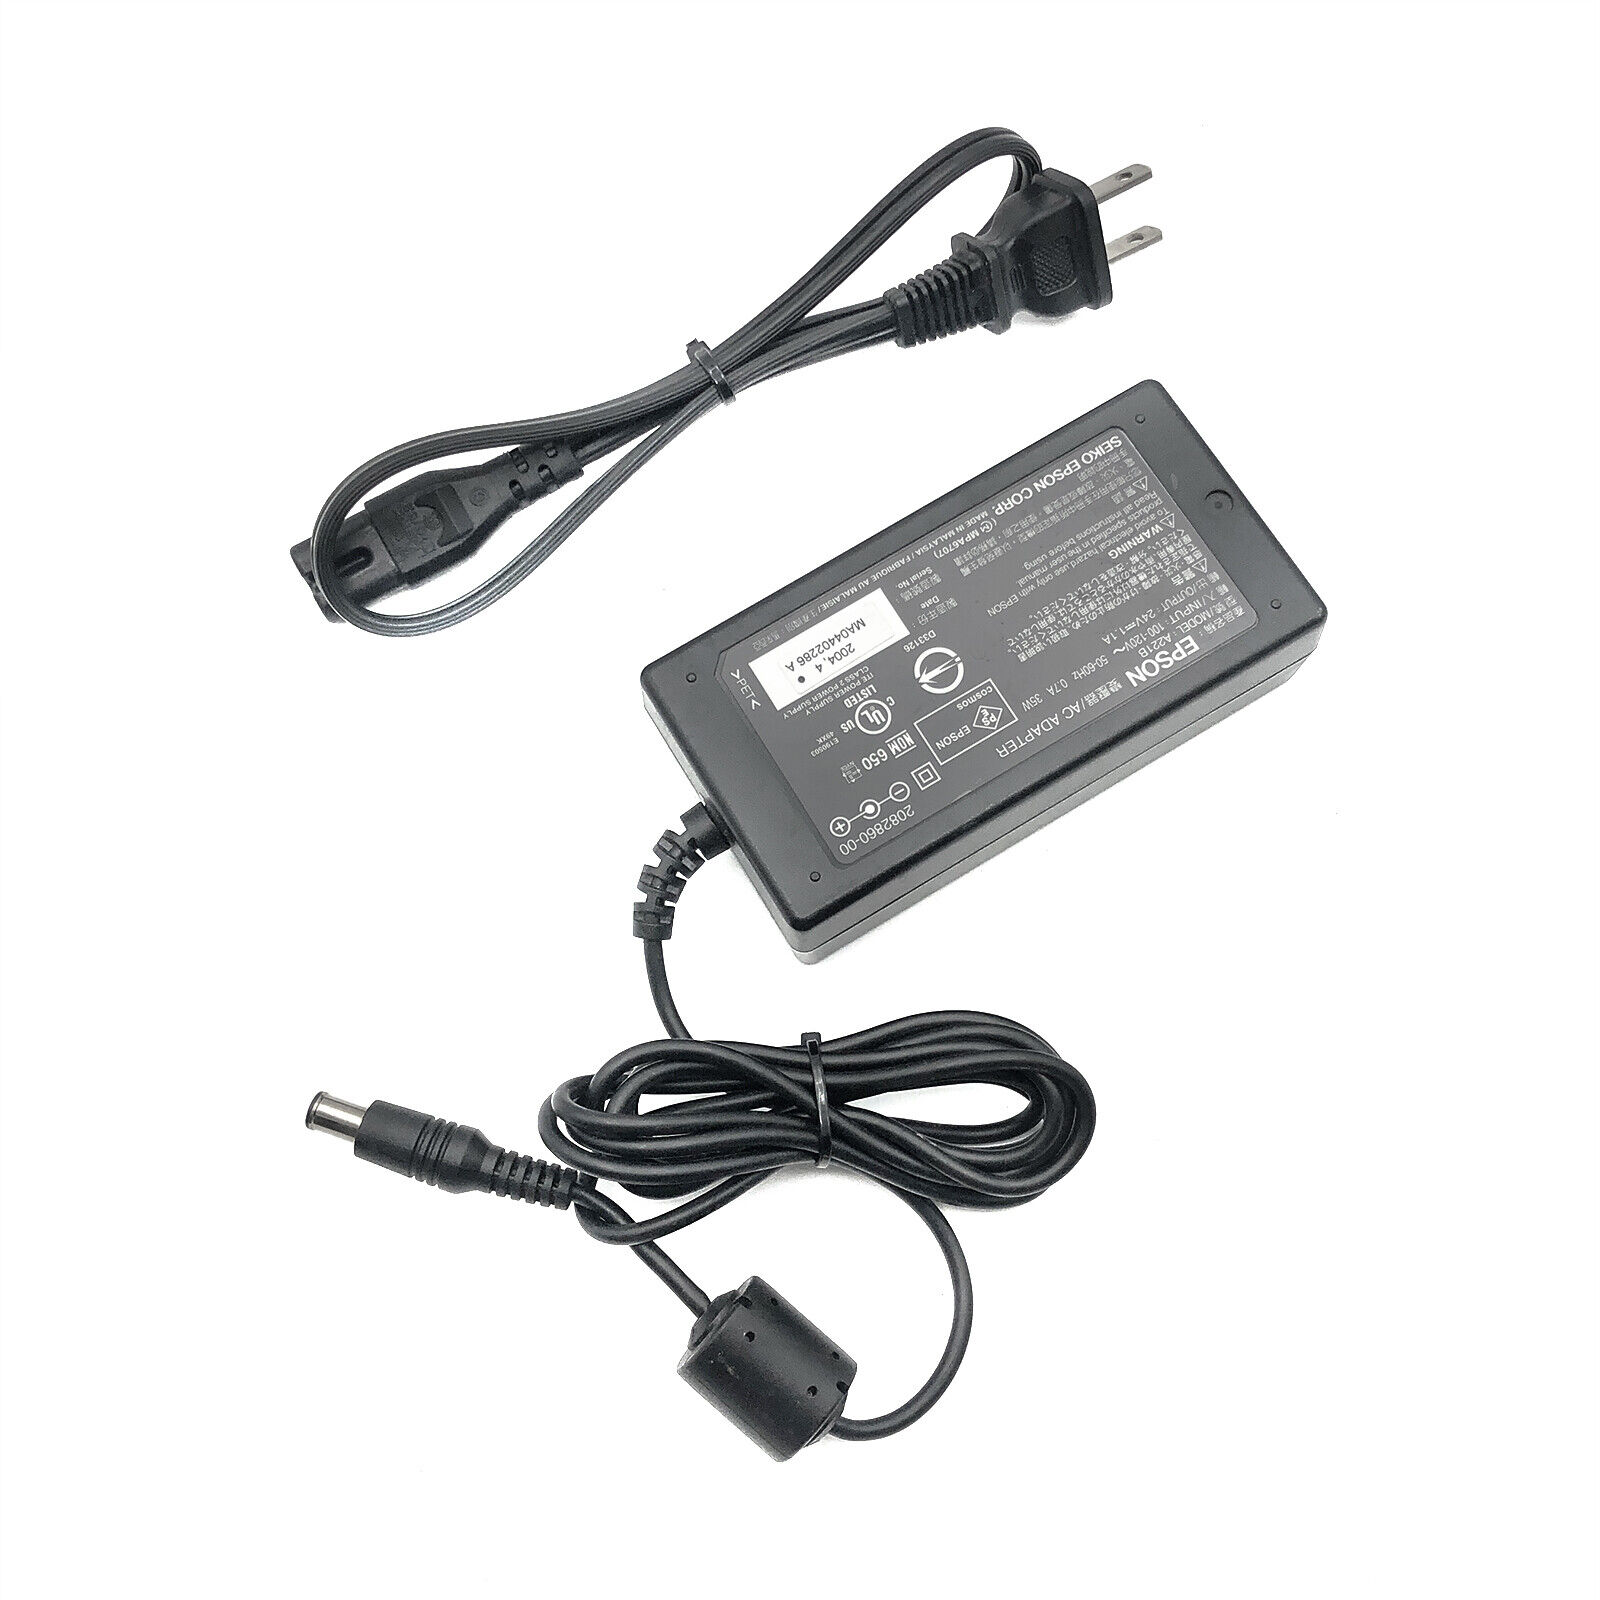 Genuine Epson AC Adapter for Epson Perfection 4490 Flatbed Scanner 24V 1.1A w/PC